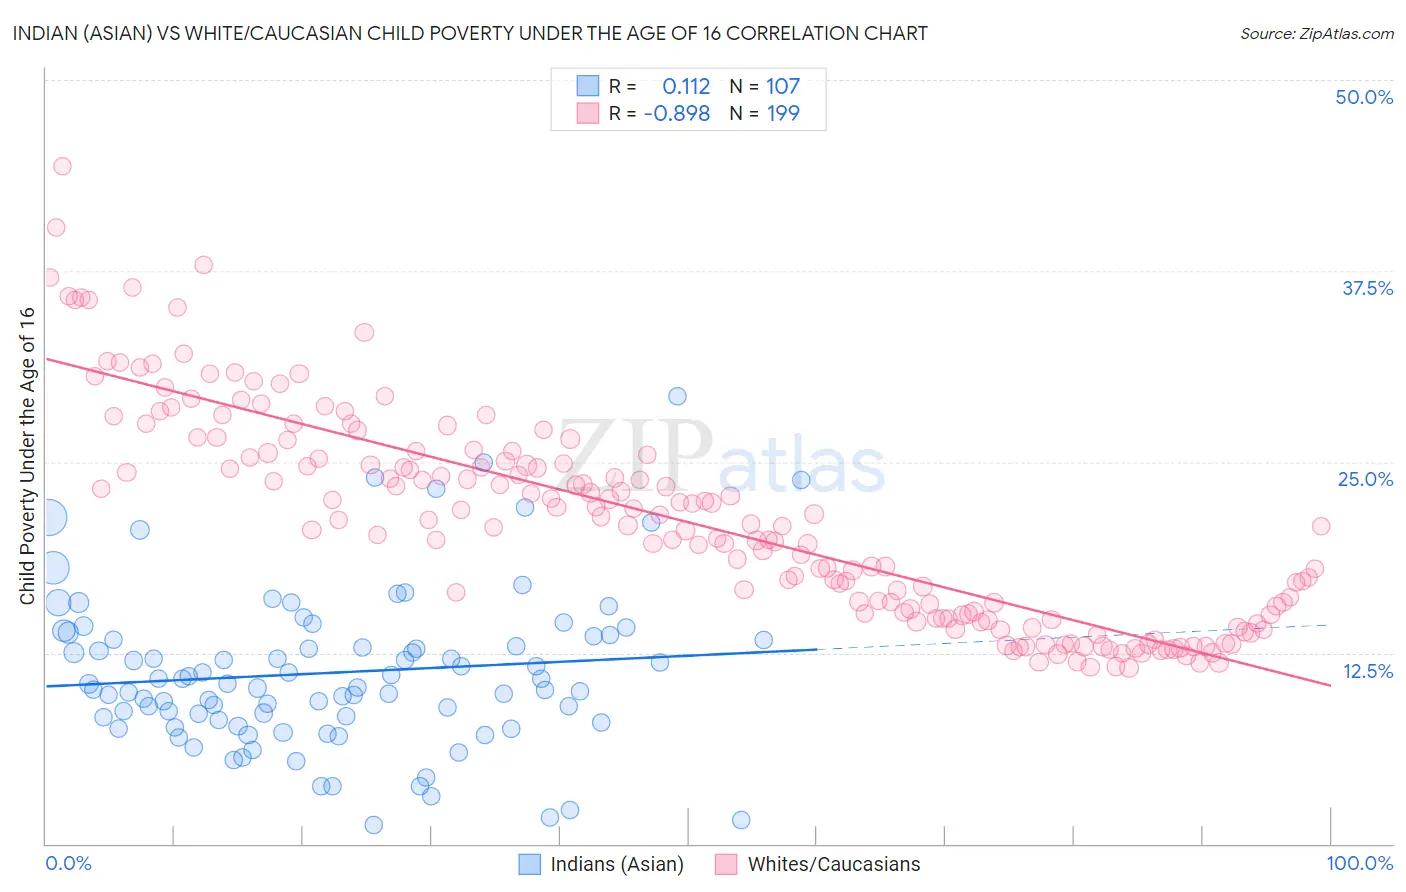 Indian (Asian) vs White/Caucasian Child Poverty Under the Age of 16